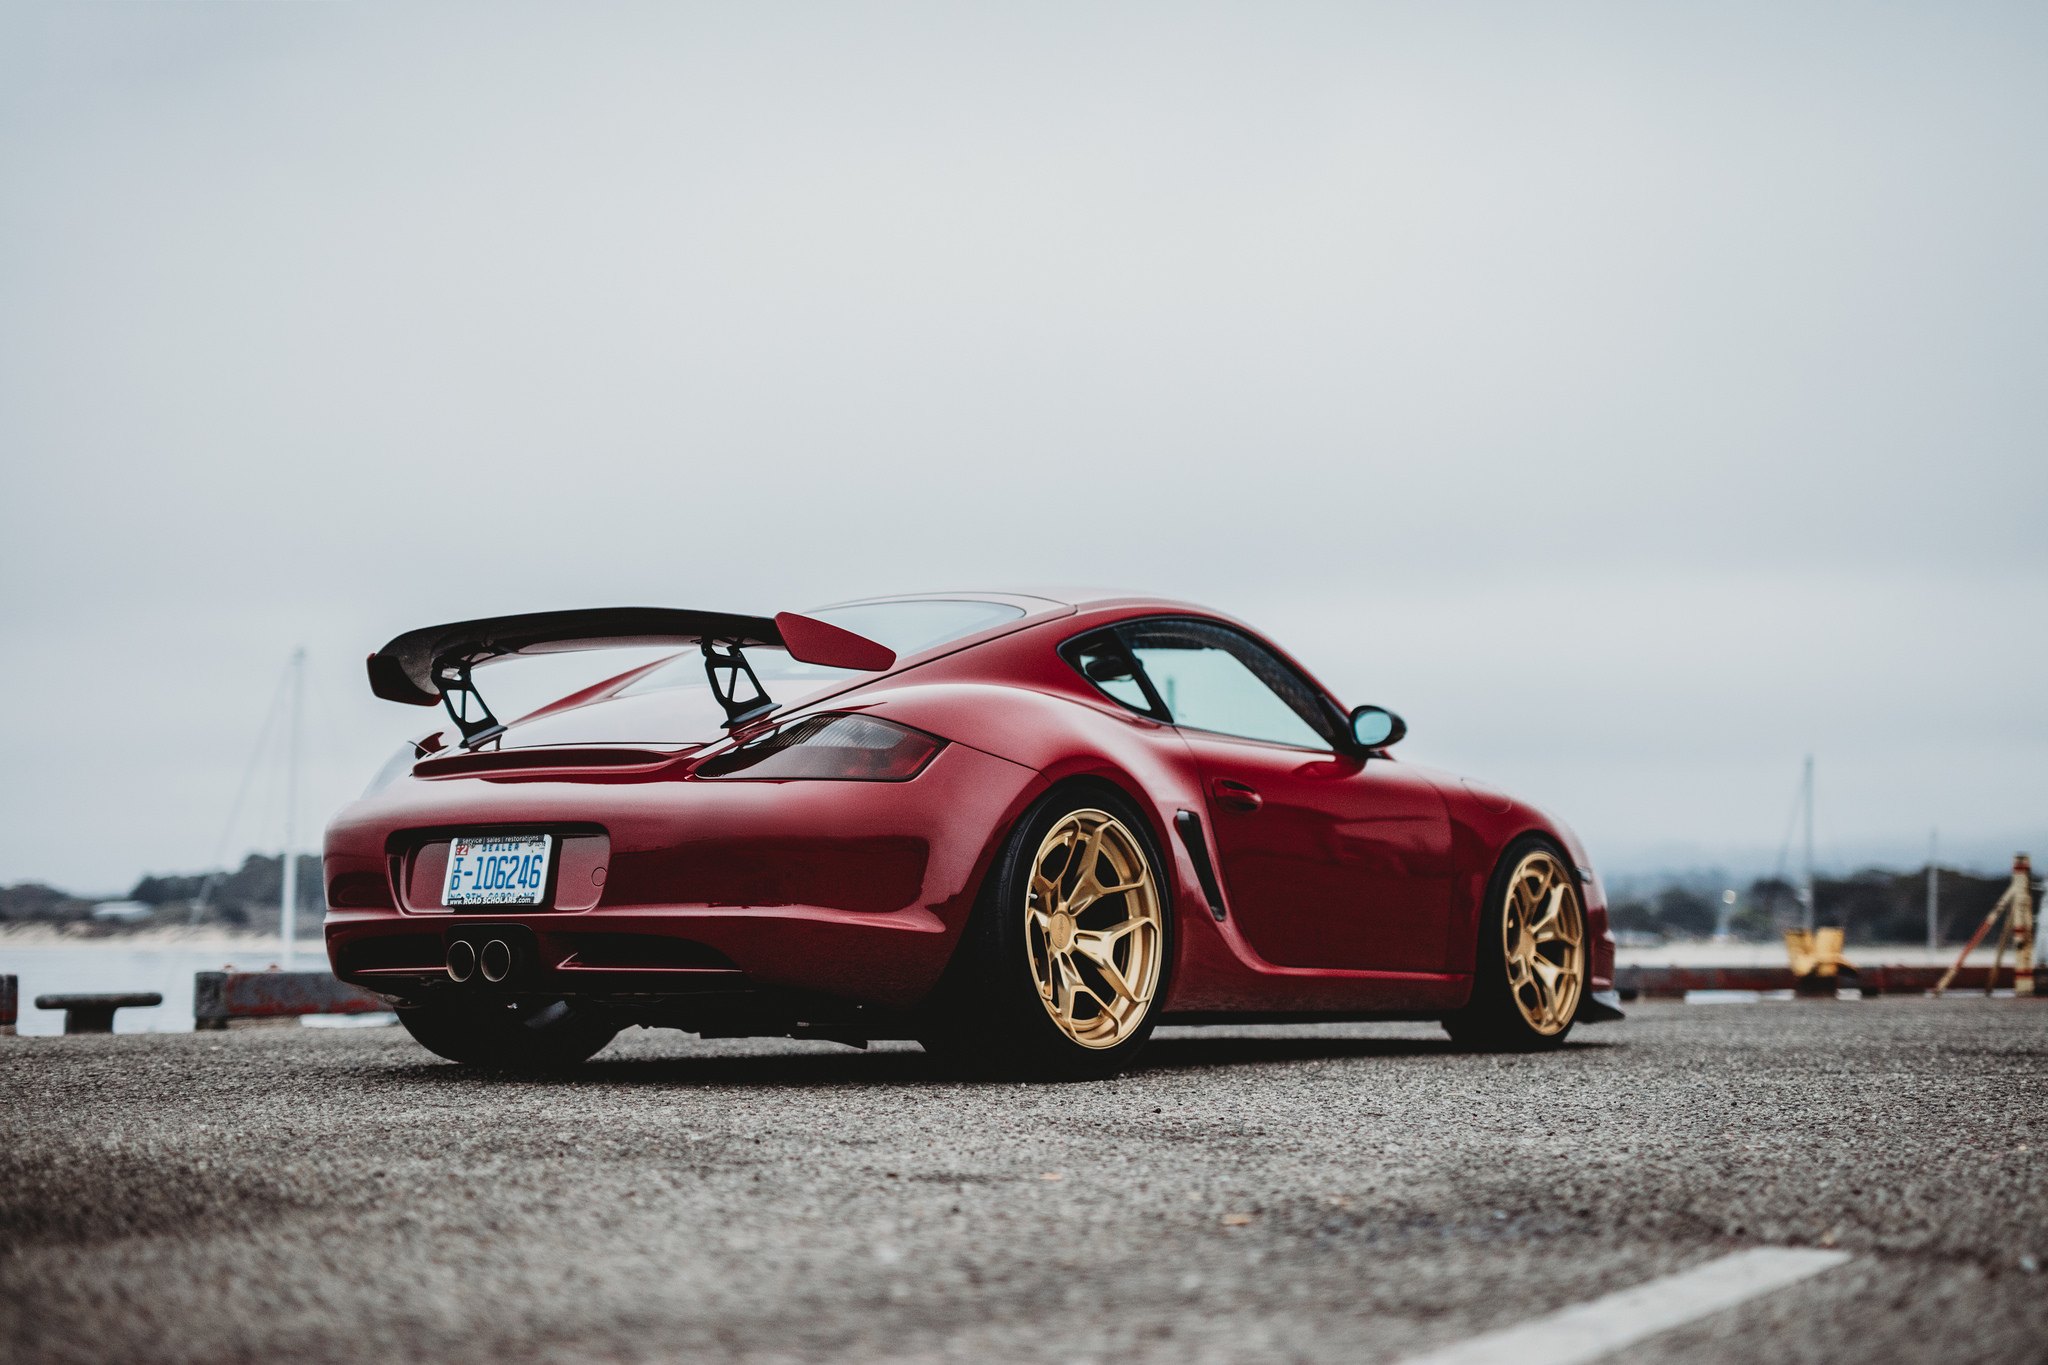 Large Wing Spoiler on Red Porsche 911 - Photo by Rotiform